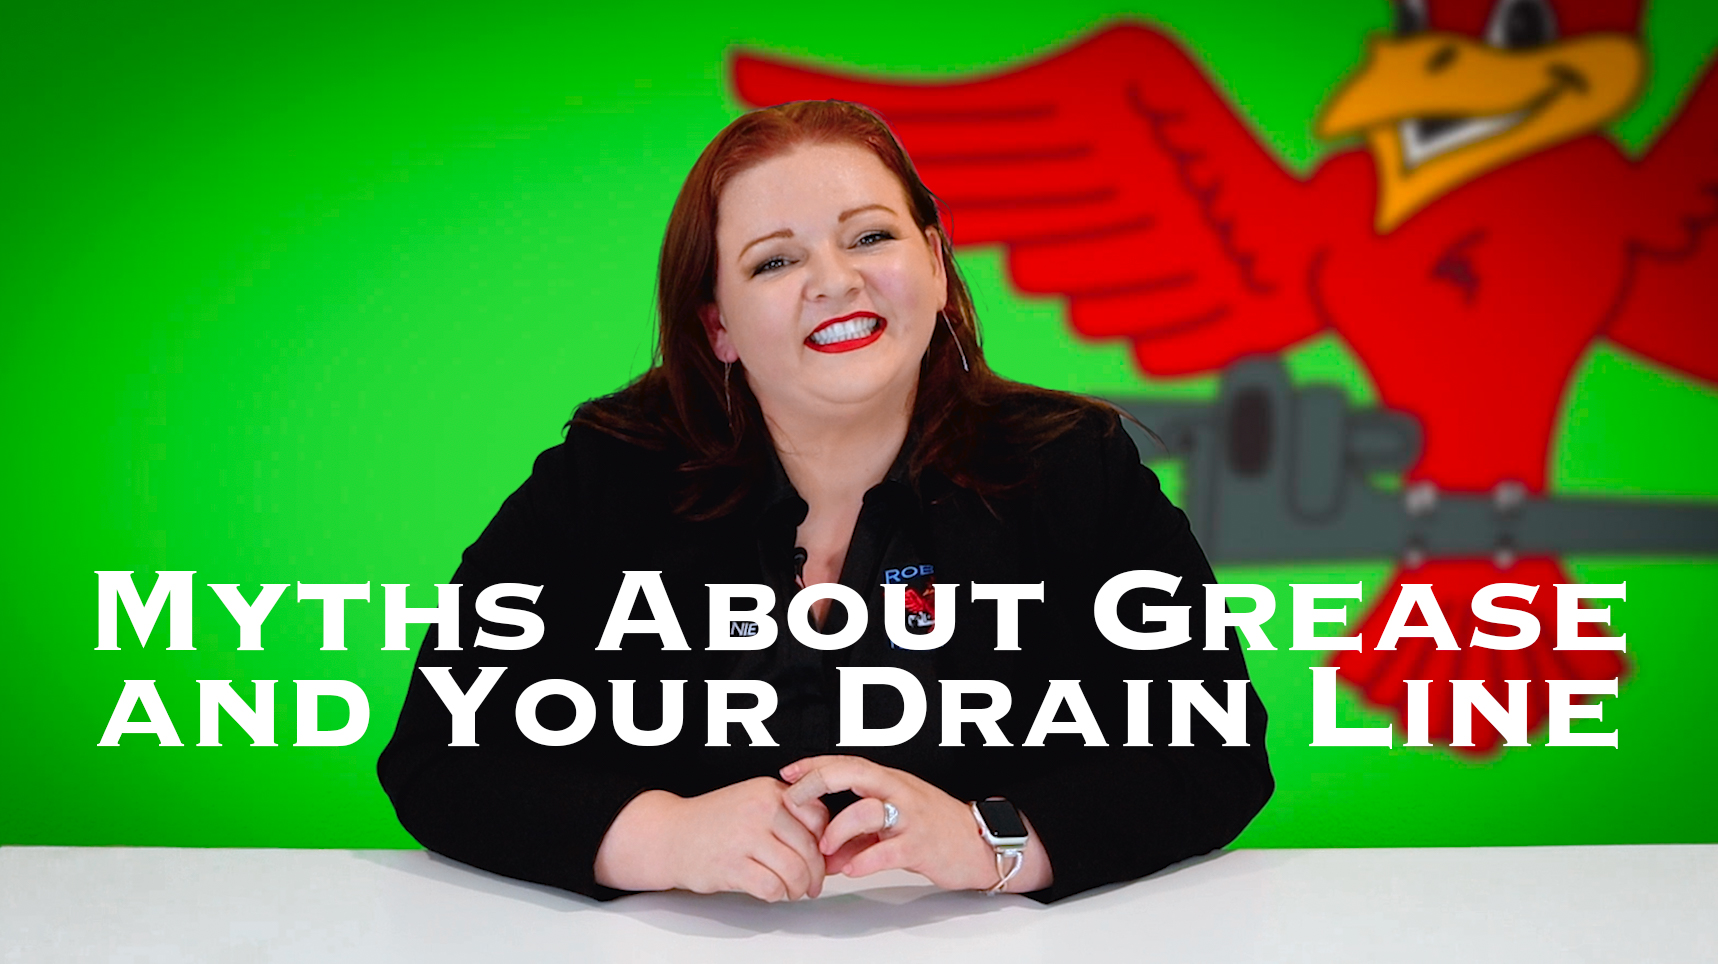 Myth-About-Grease-and-Your-Drain-Line